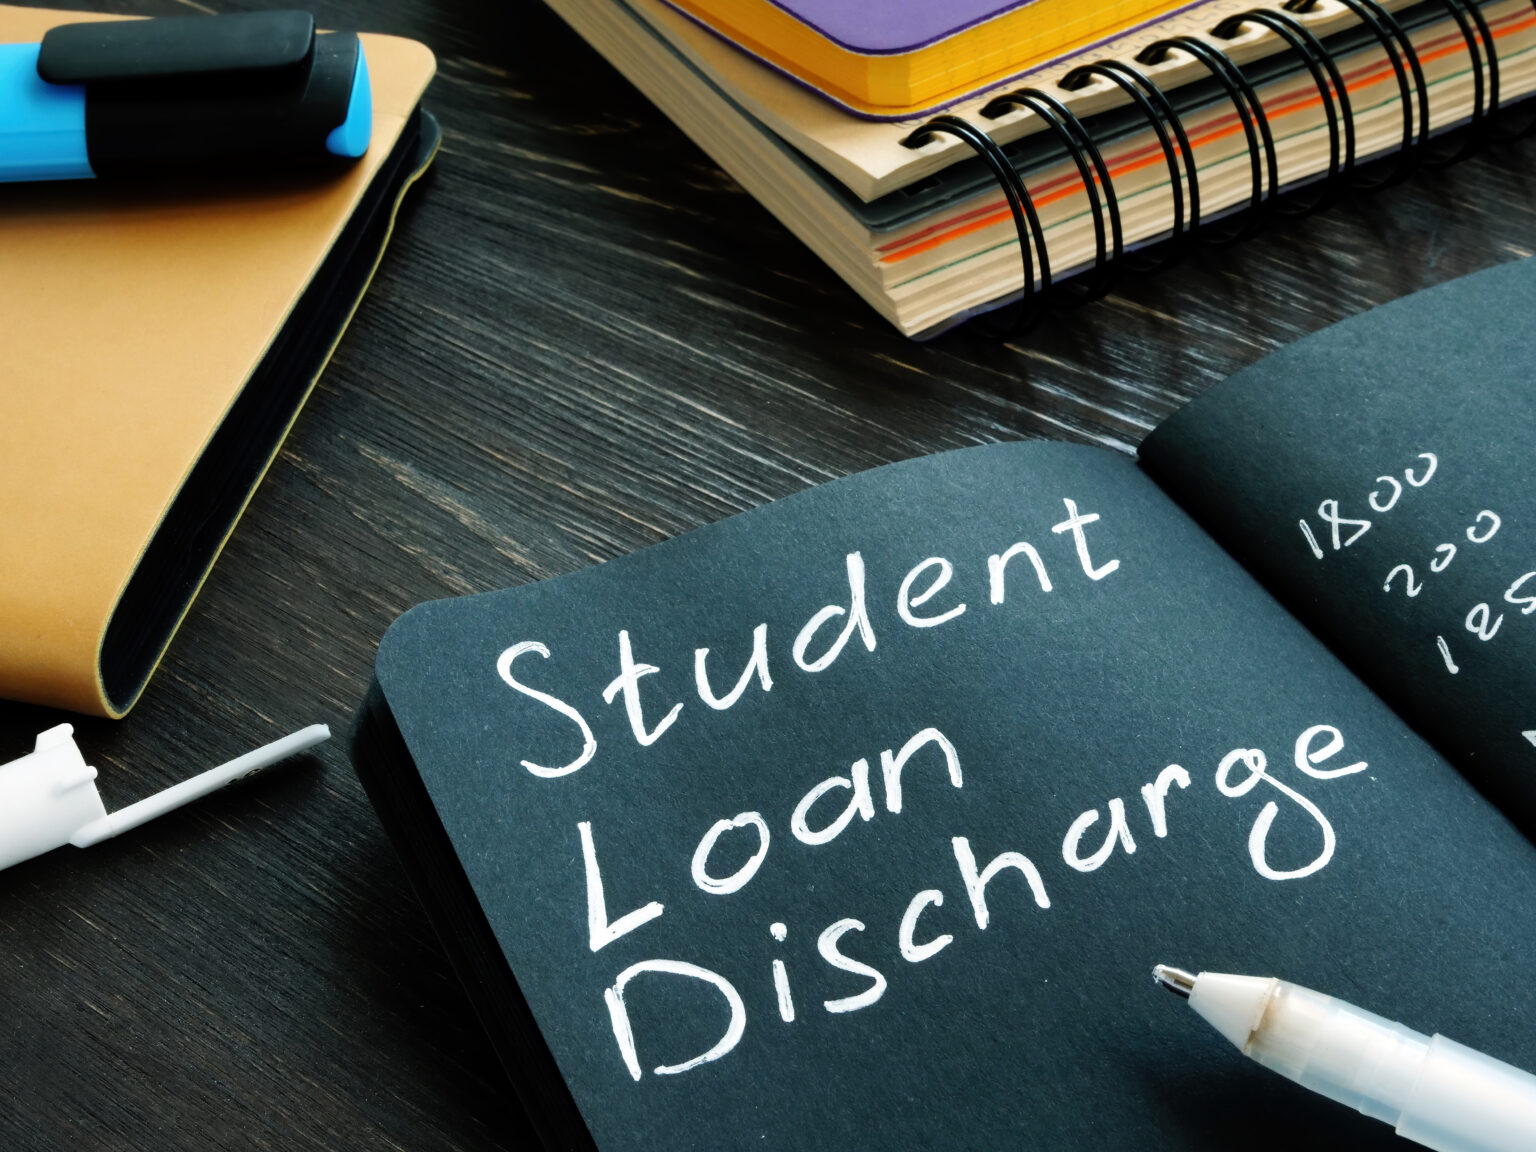 Loan student relief federal borrowers expanded april posted